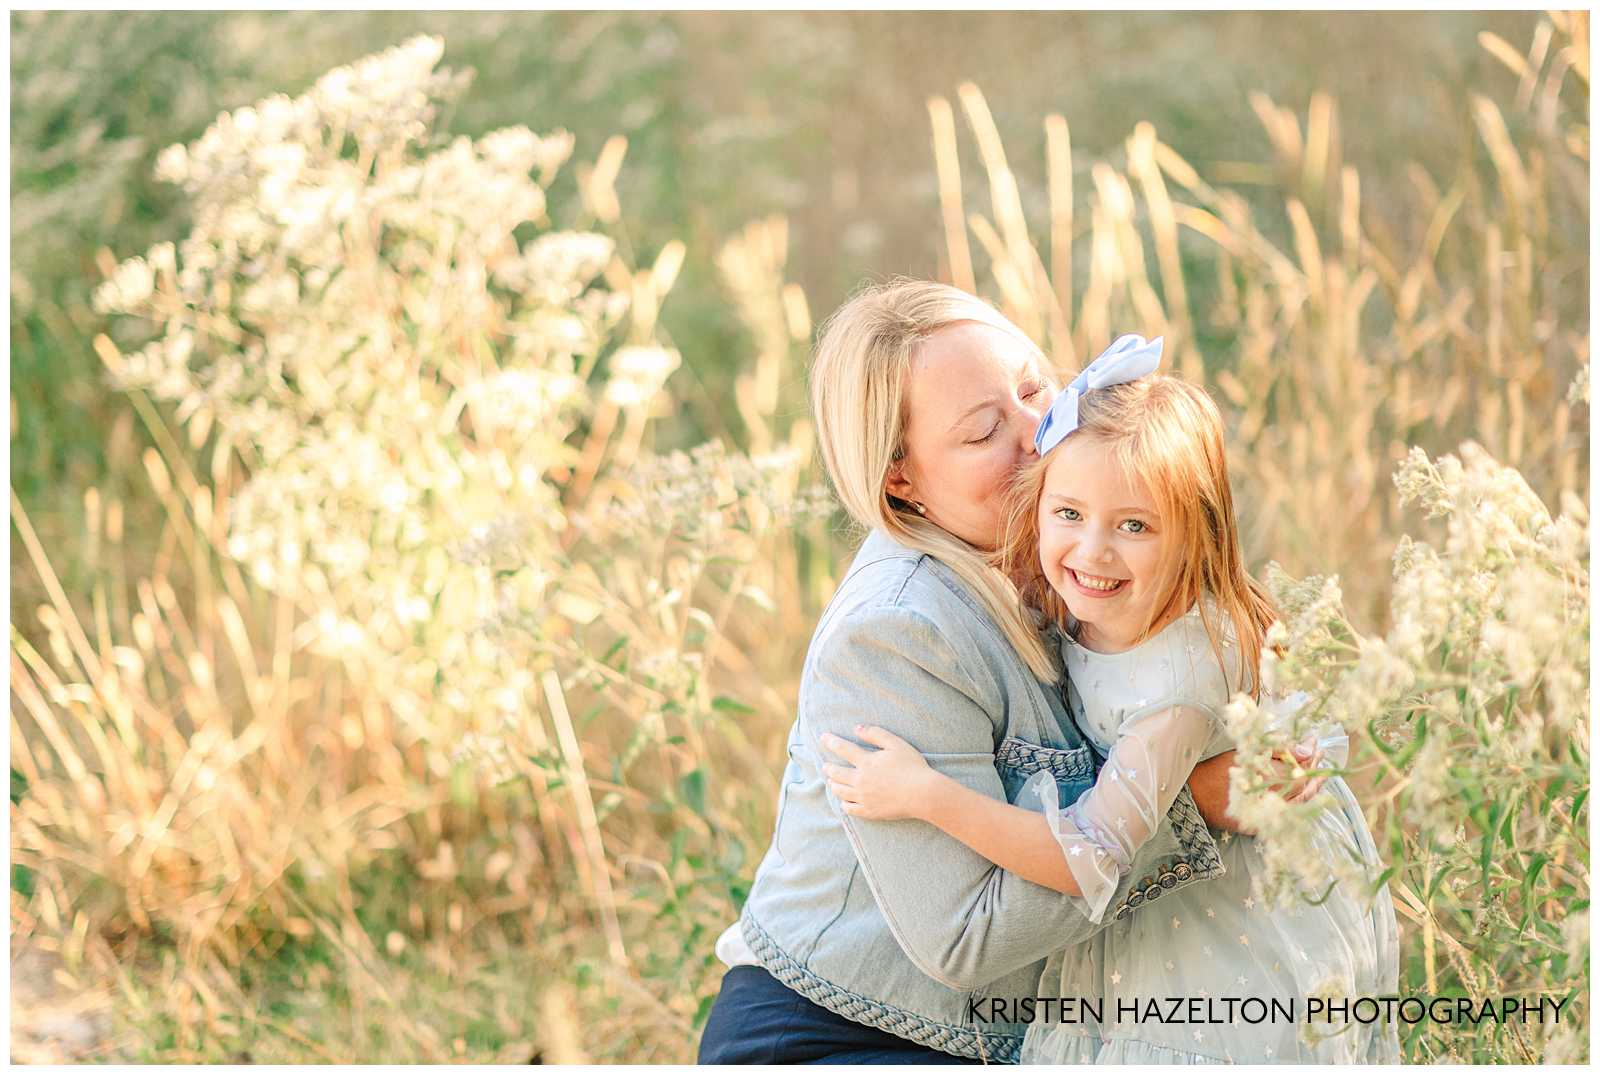 Mom crouching down and kissing her daughter's cheek in a field of wildflowers and grass. River Forest IL family portraits by Kristen Hazelton